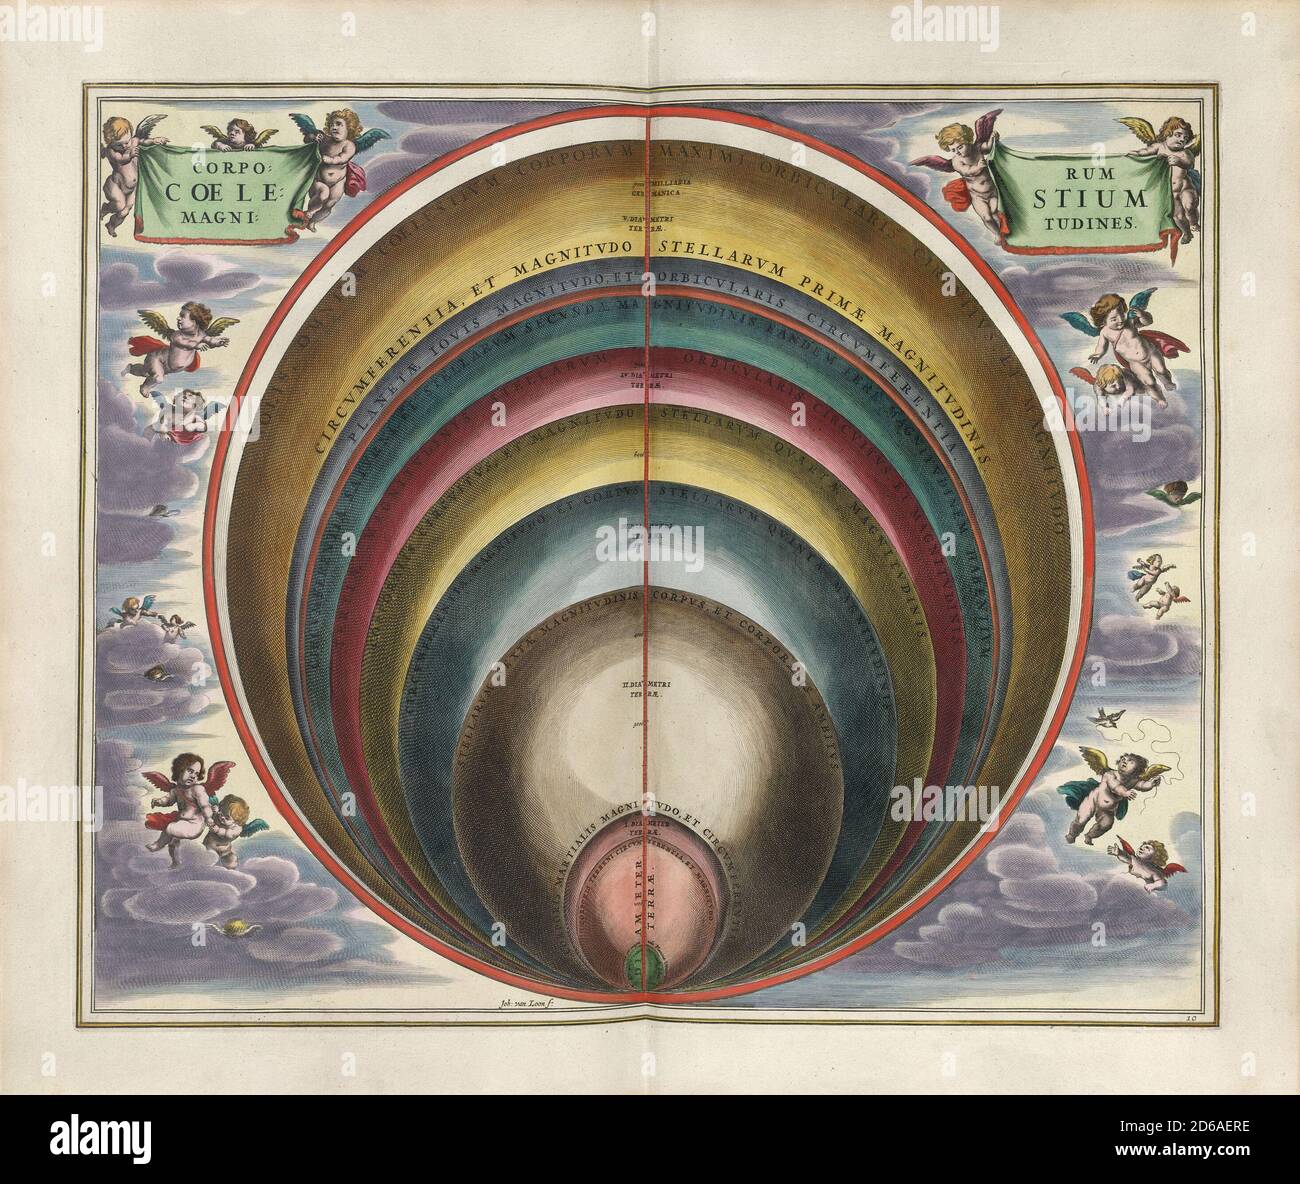 Title: The sizes of the celestial bodies. Engraved by Johannes van Loon [in some copies the terrestrial sphere has the continents drawn in by hand]. Engraving from Harmonia Macrocosmica Creator: Andreas Cellarius Date: c. 17th Medium: hand coloured engraving Location: The British Library Stock Photo